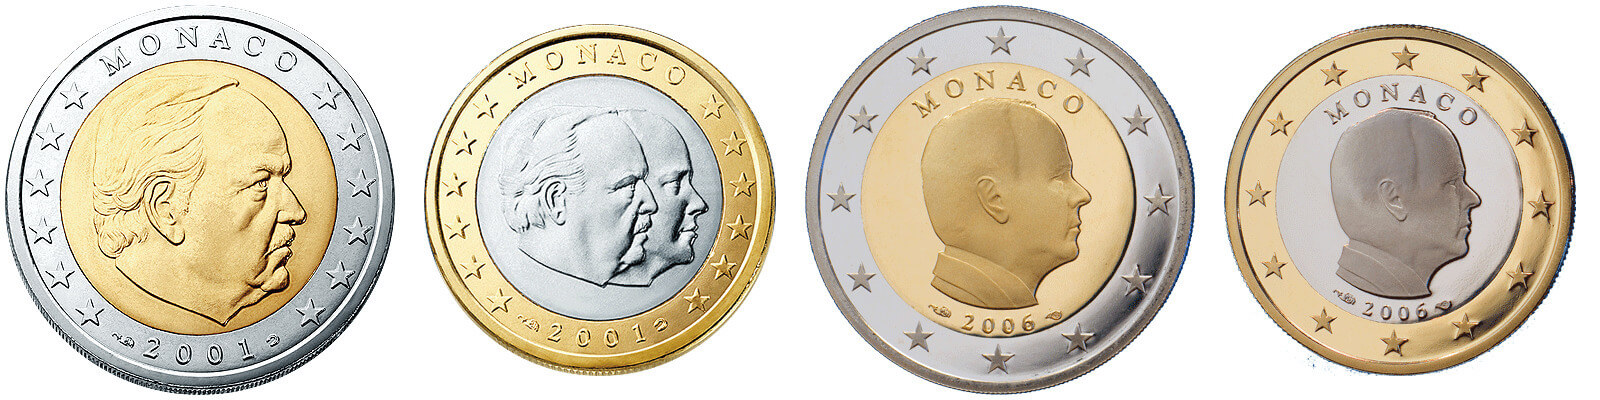 Back to the Middle Ages – With the Cent Coins of the Principality of Monaco  - CoinsWeekly